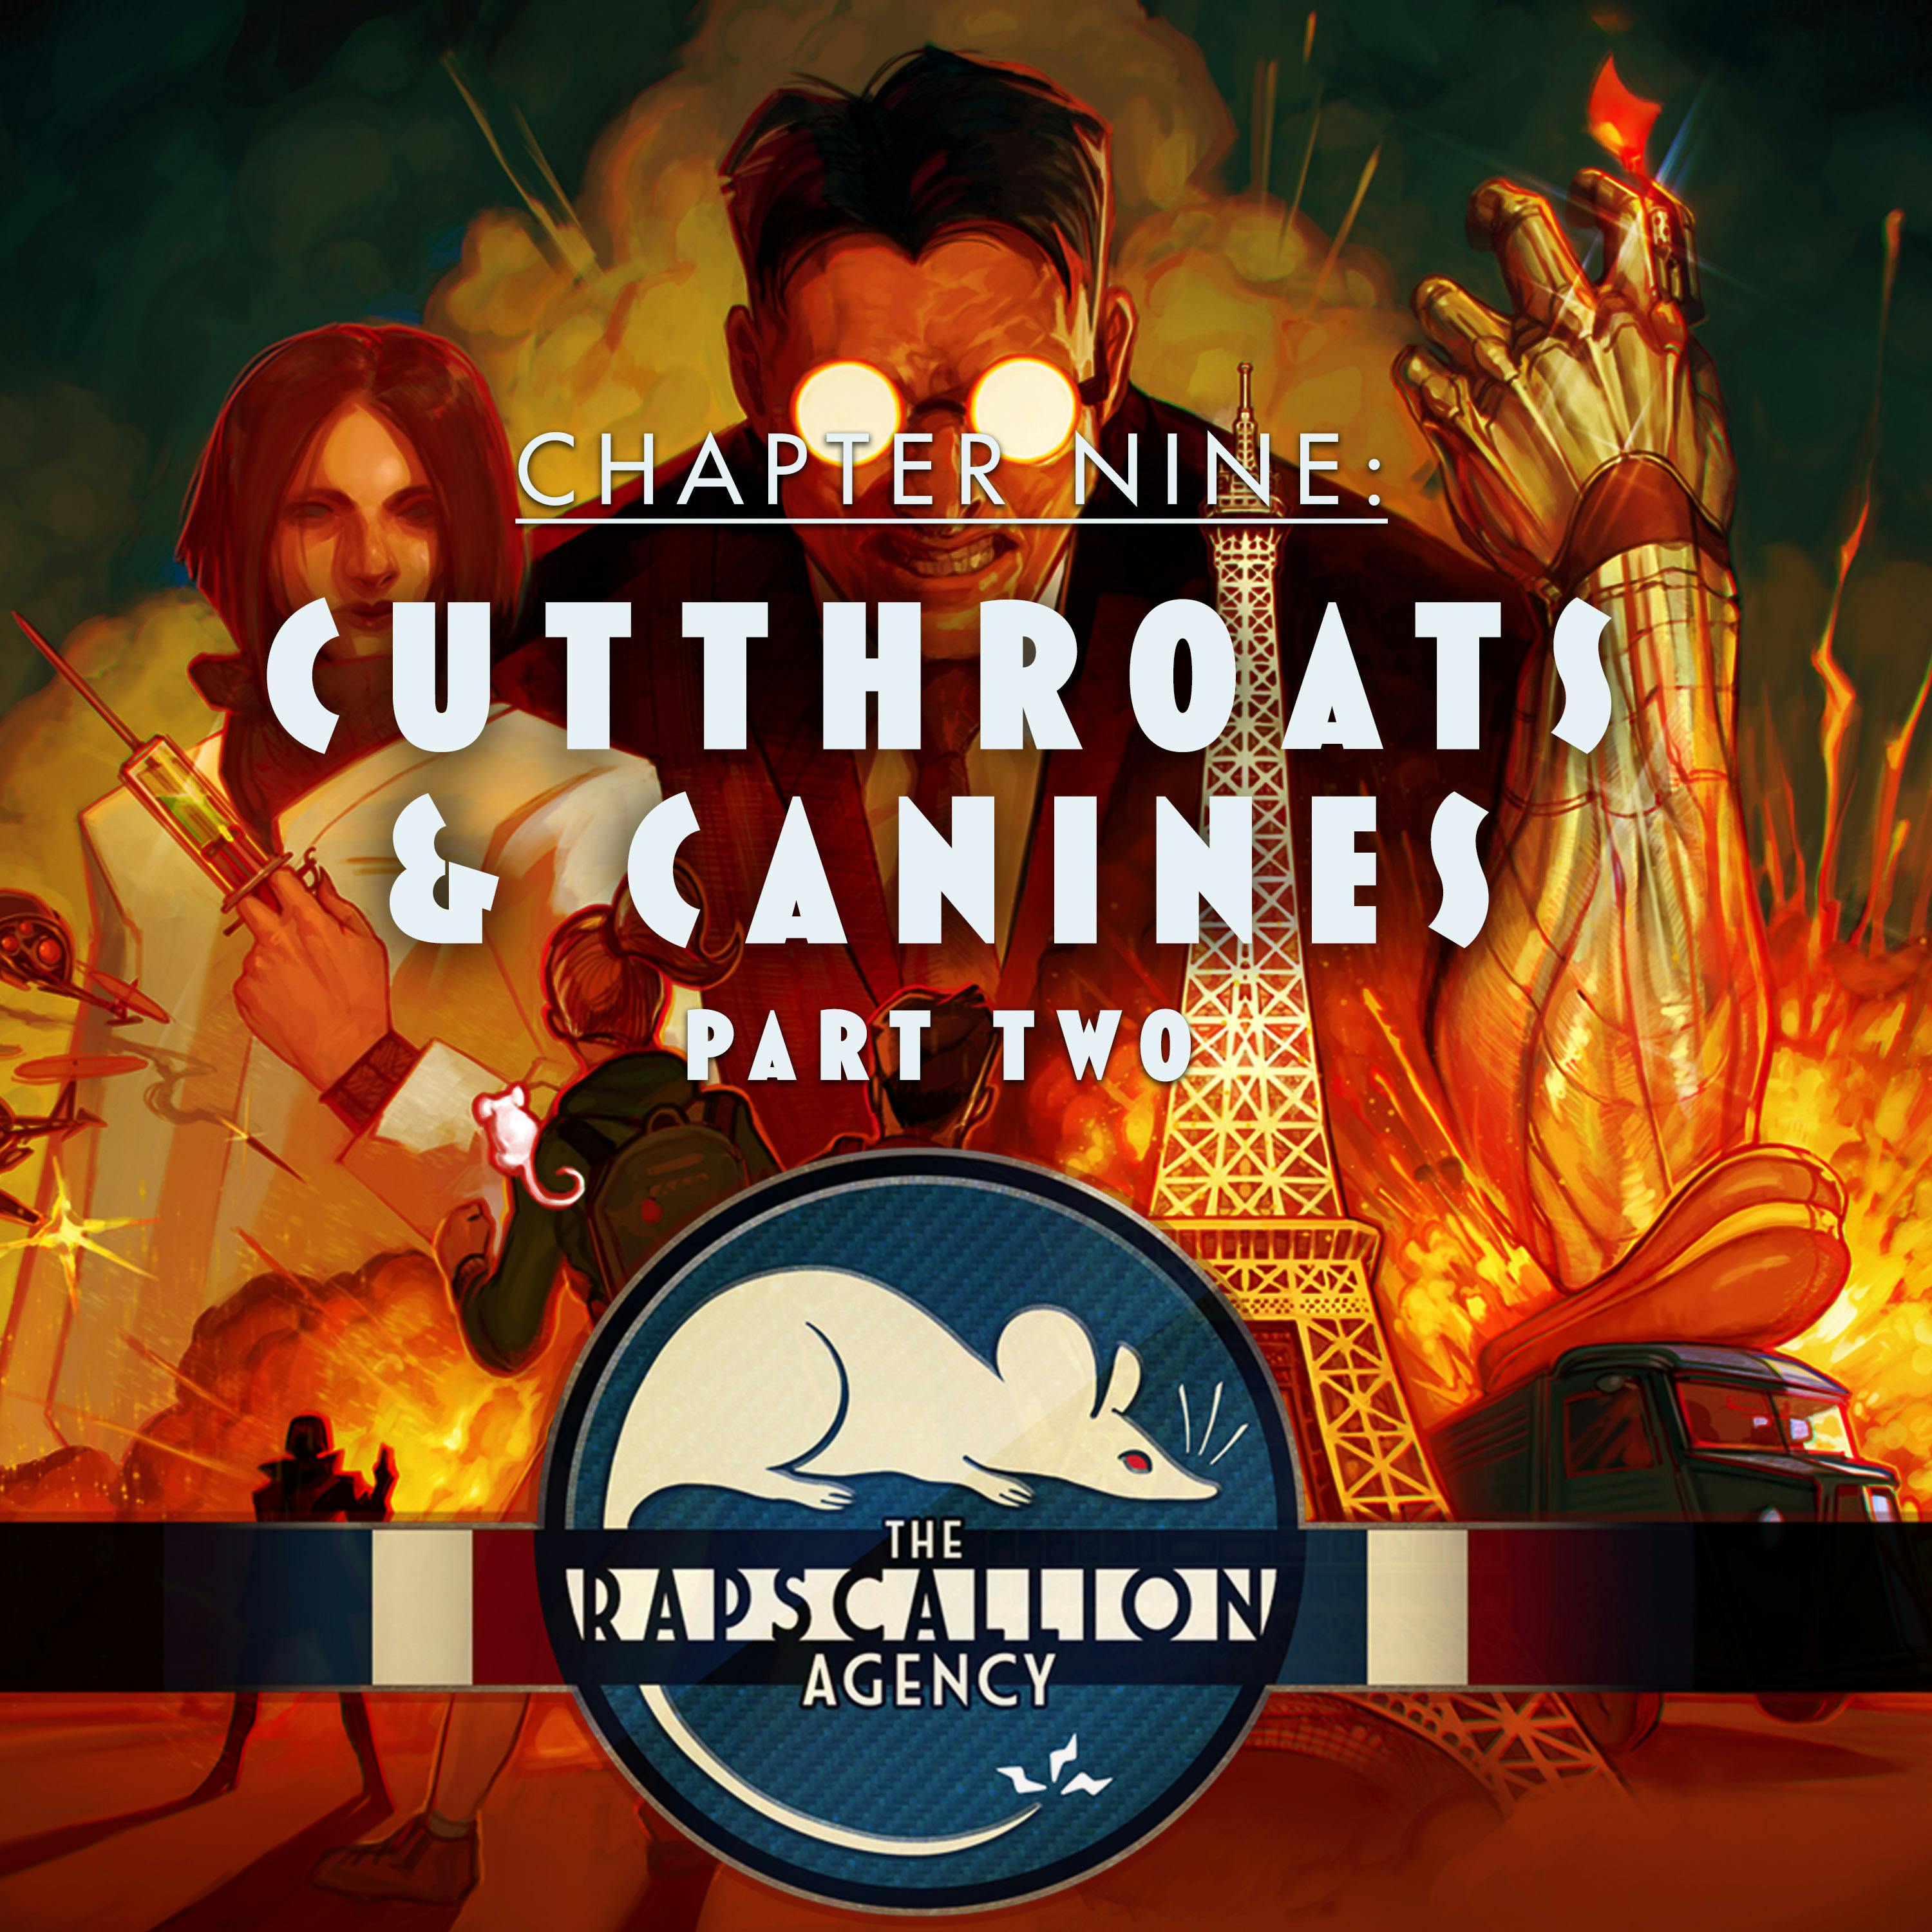 The Rapscallion Agency | Chapter 9 - Cutthroats and Canines Part 2